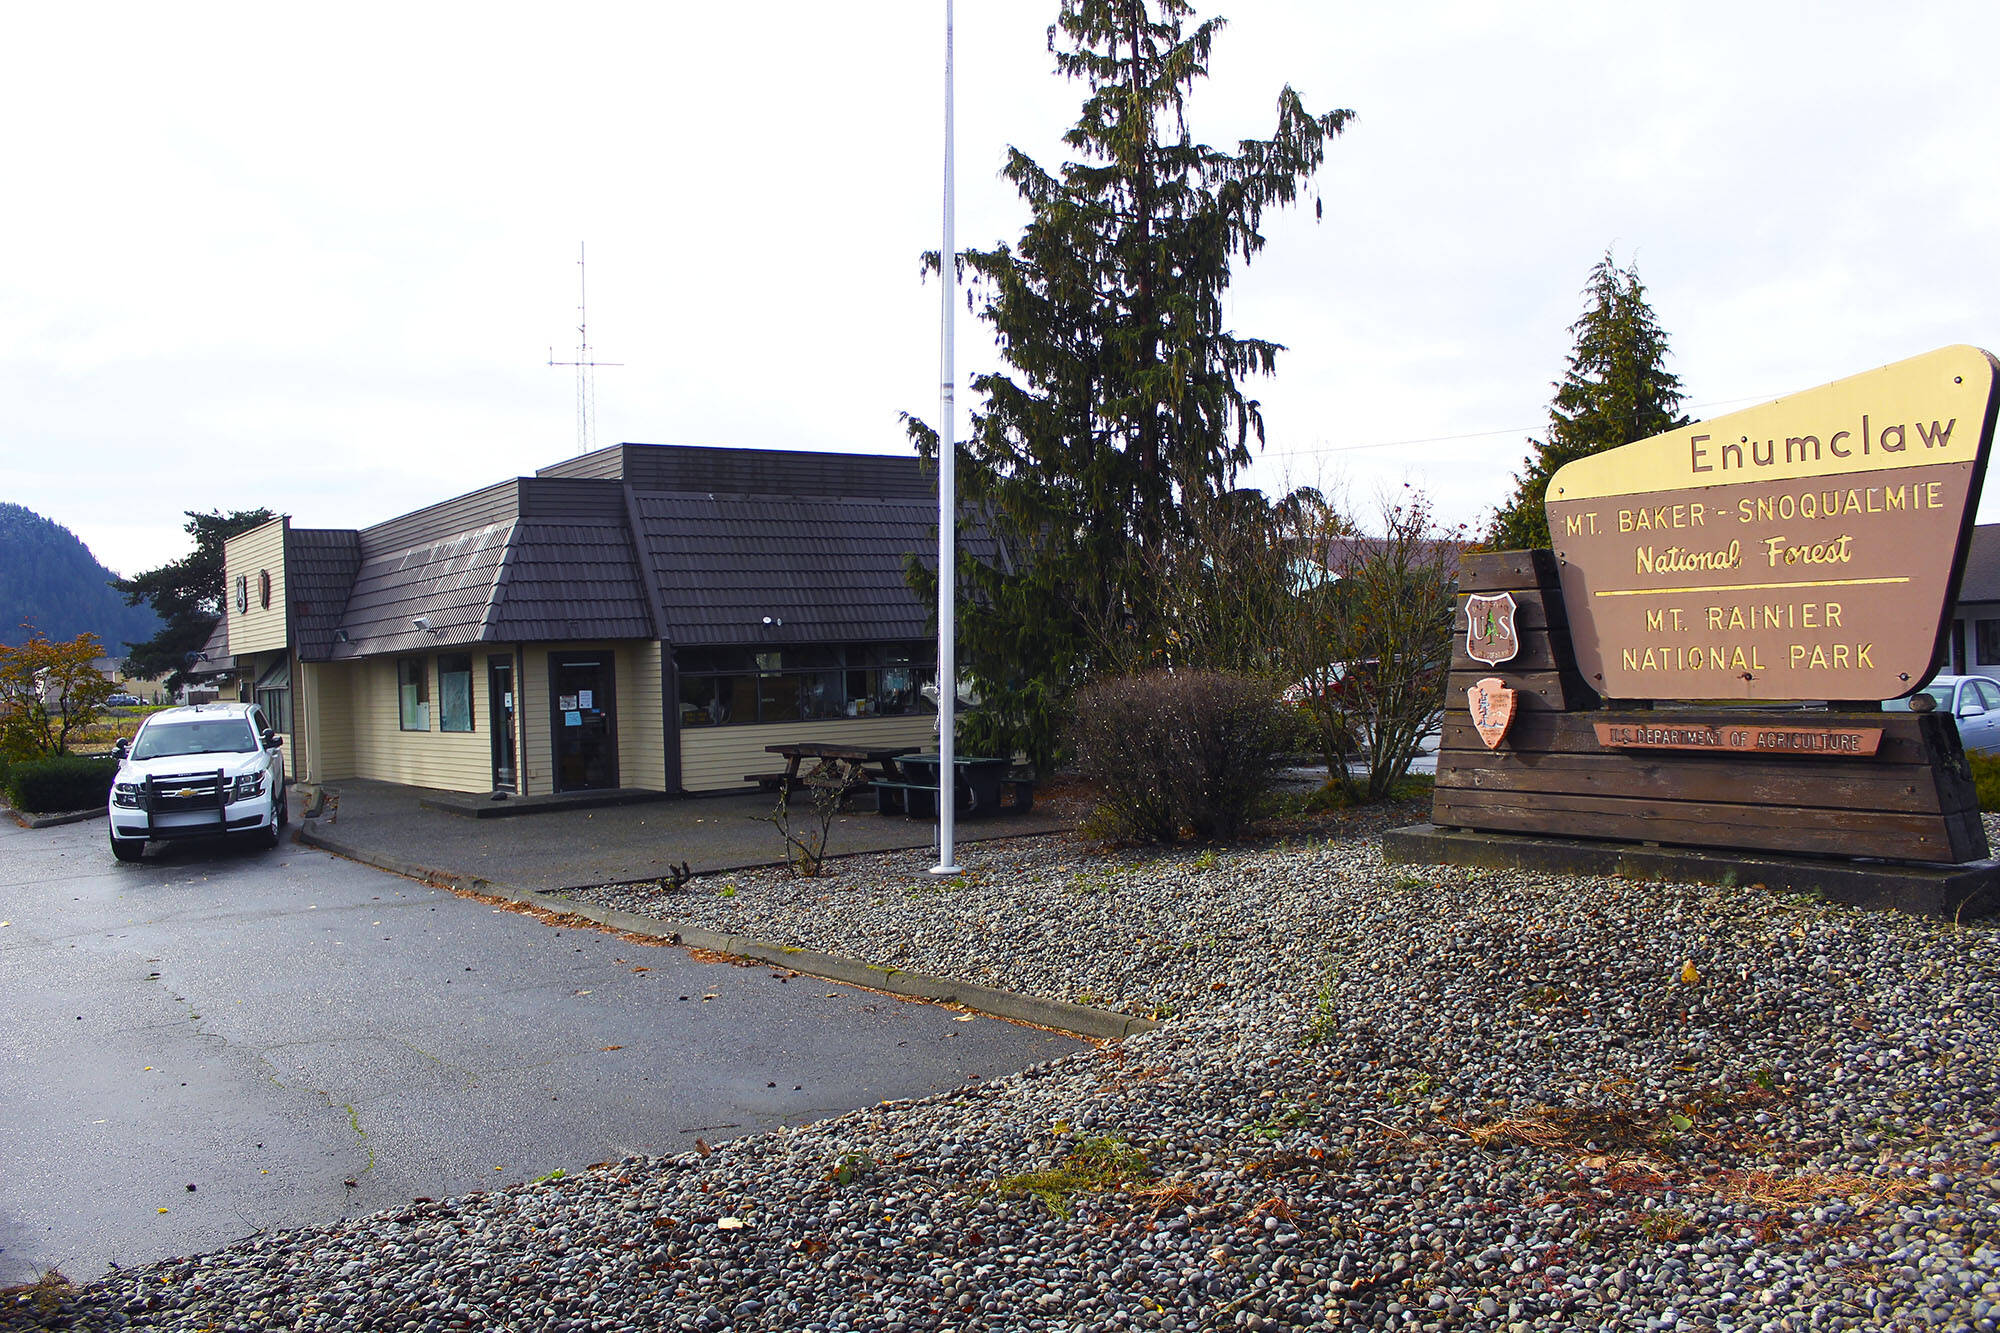 Photo by Ray Miller-Still 
Enumclaw’s Forest Service office, which serves as a home base for permanent staff, seasonal workers, and volunteers, may close in 2024. Opponents against the move say this will drastically affect the area’s natural recreation services and upkeep.